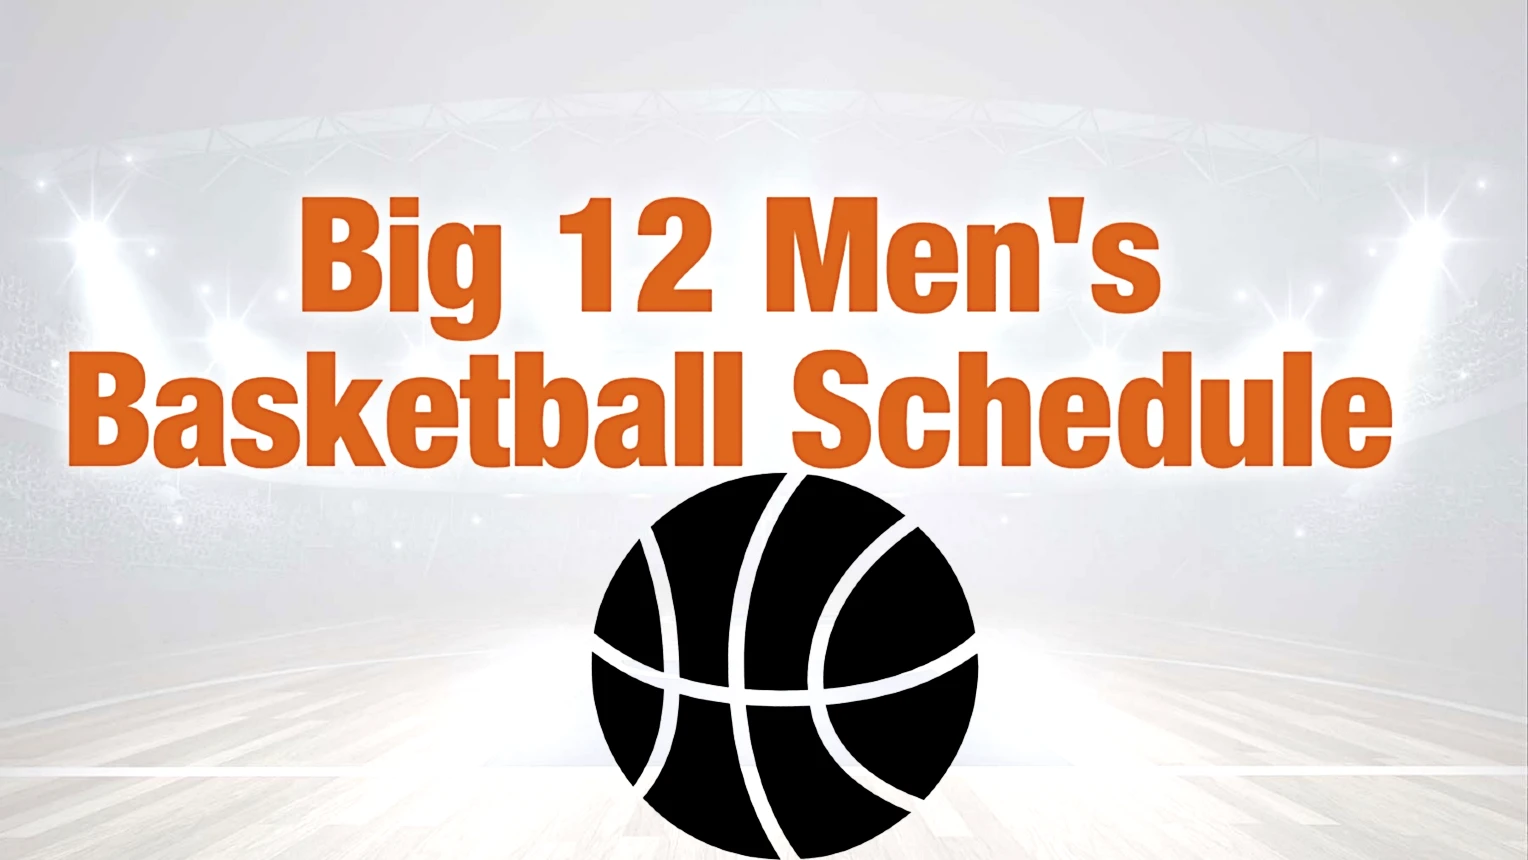 Big 12 men's basketball schedule tonight and live tv channels